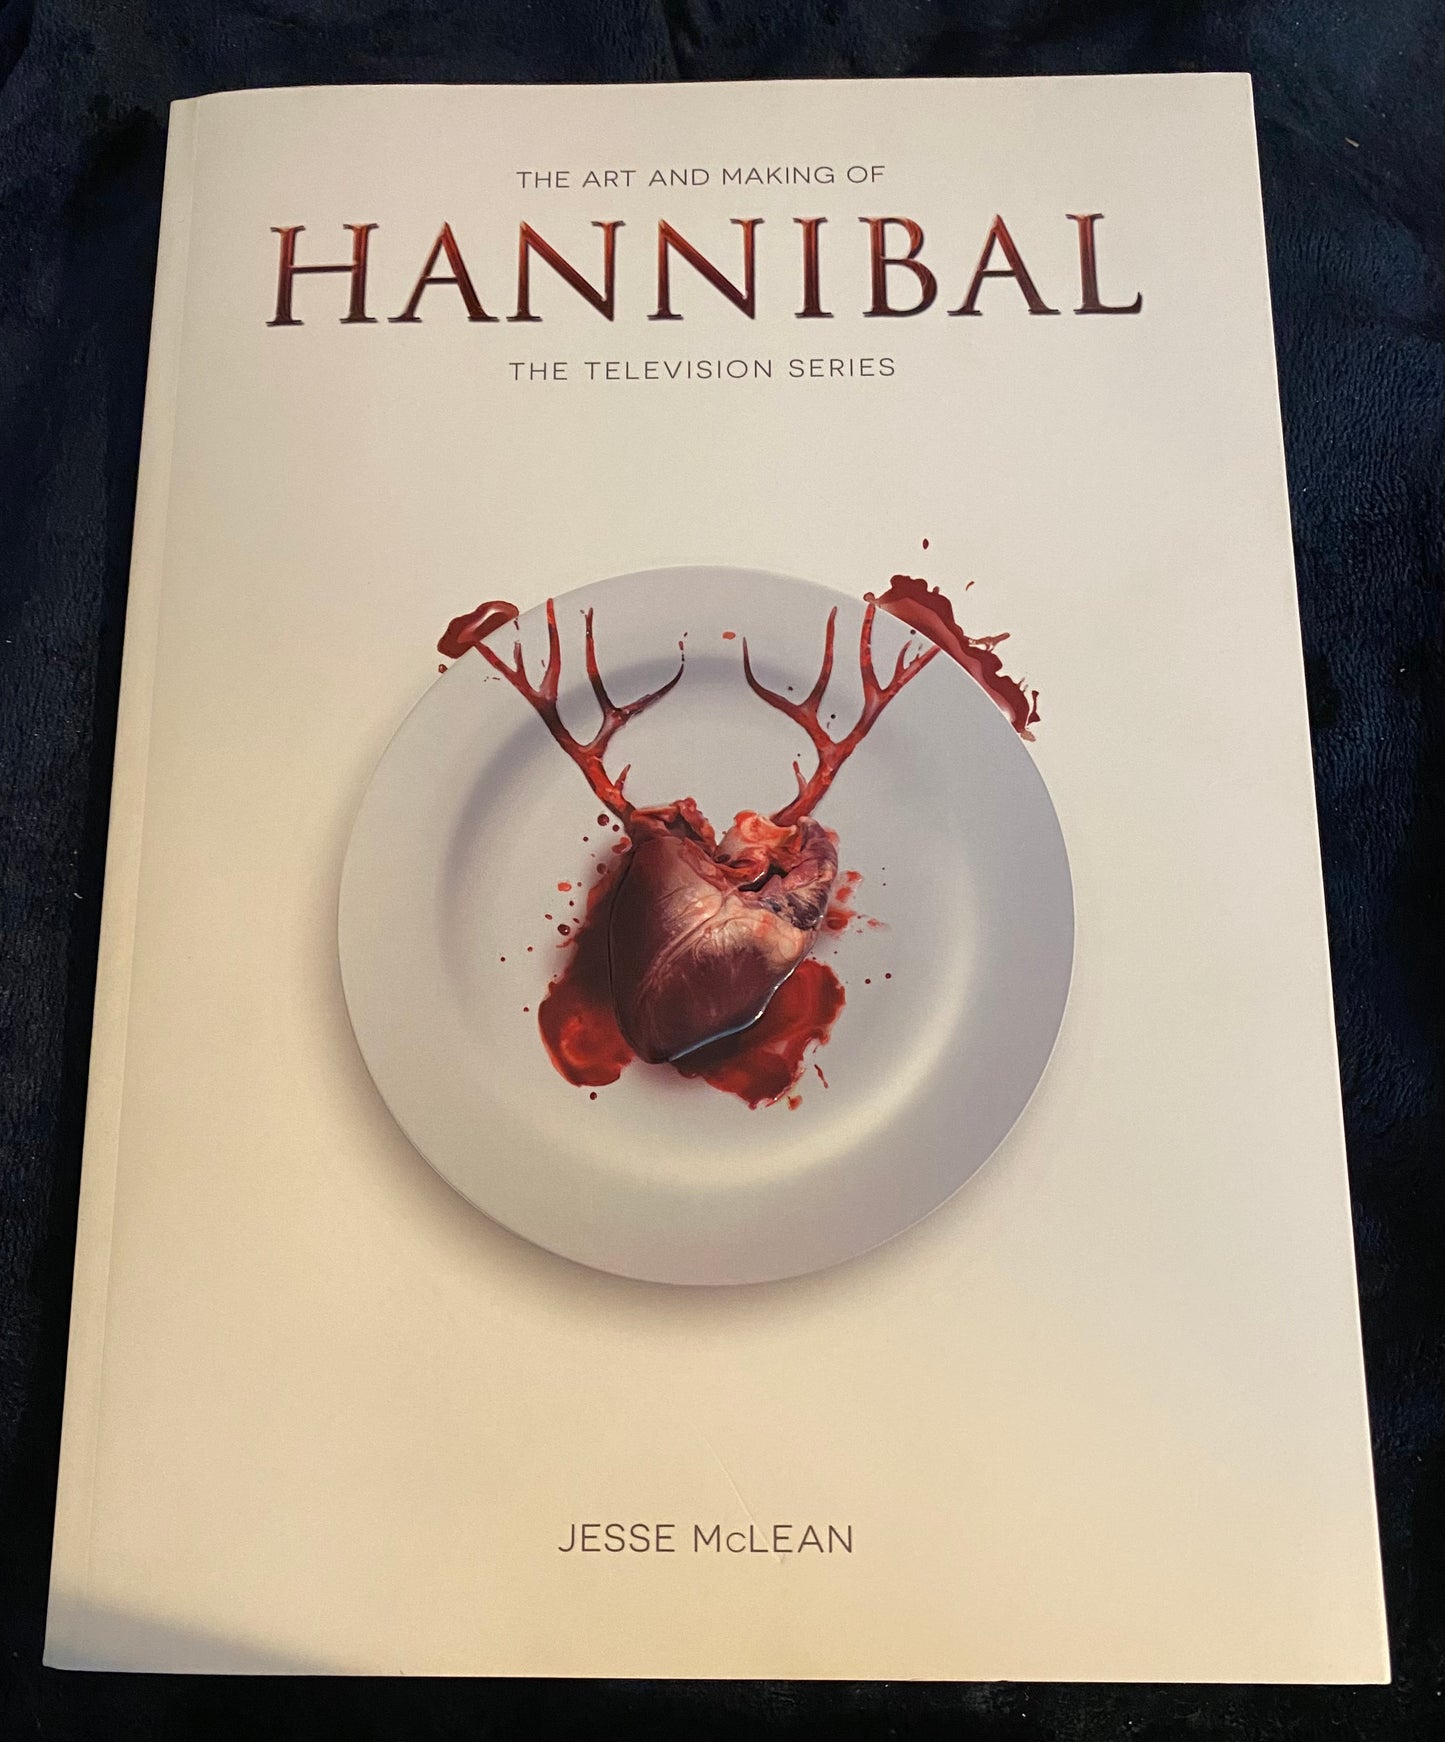 The Art and Making of Hannibal : The Television Series by Jesse McLean